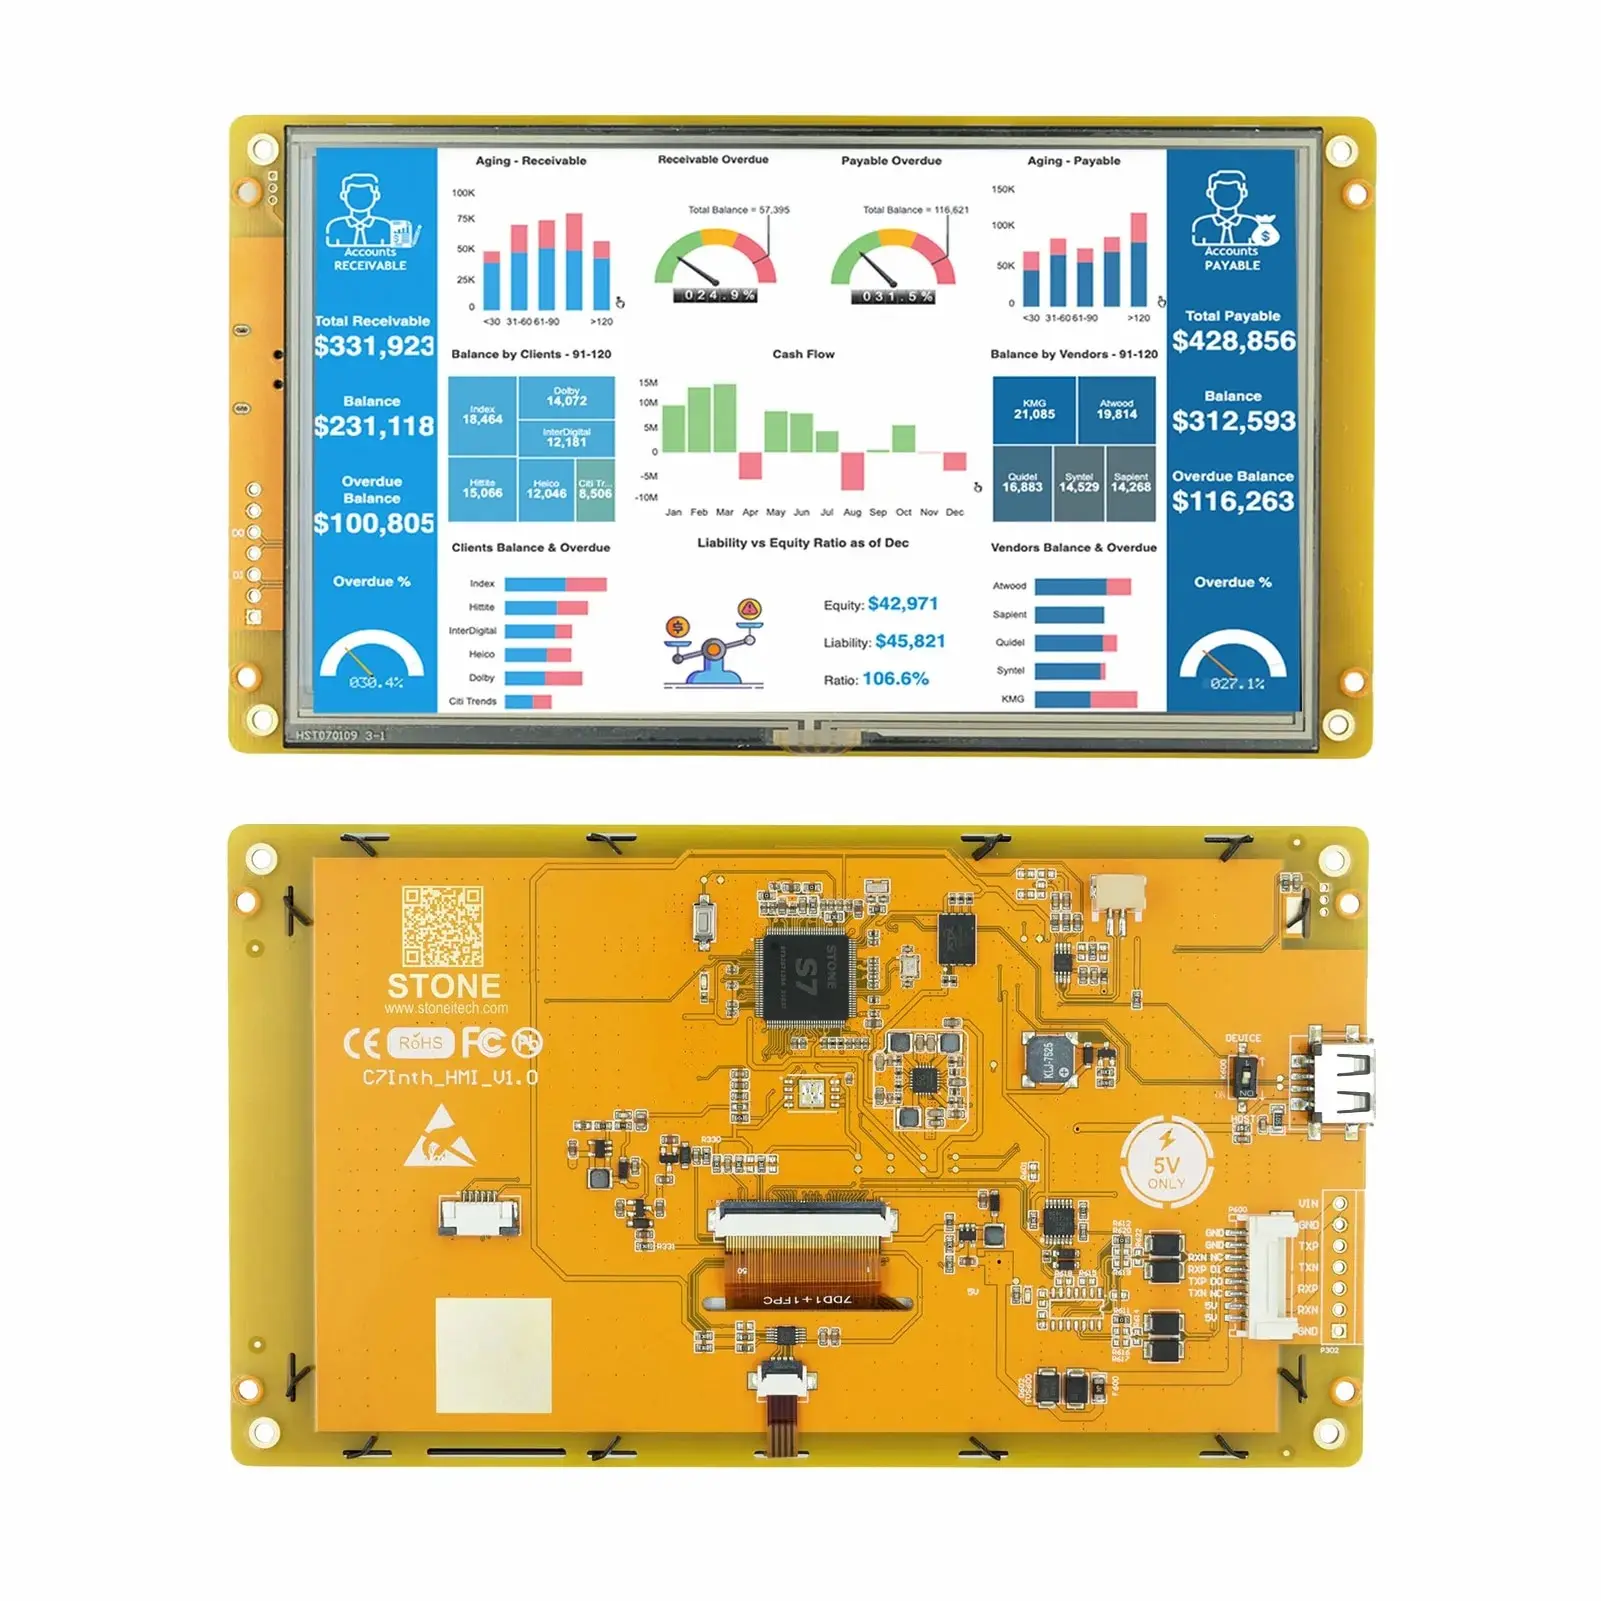 

7.0 TFT Touch Screen TFT LCD module whole display system that comes with no-cost GUI design software(STONE Designer)